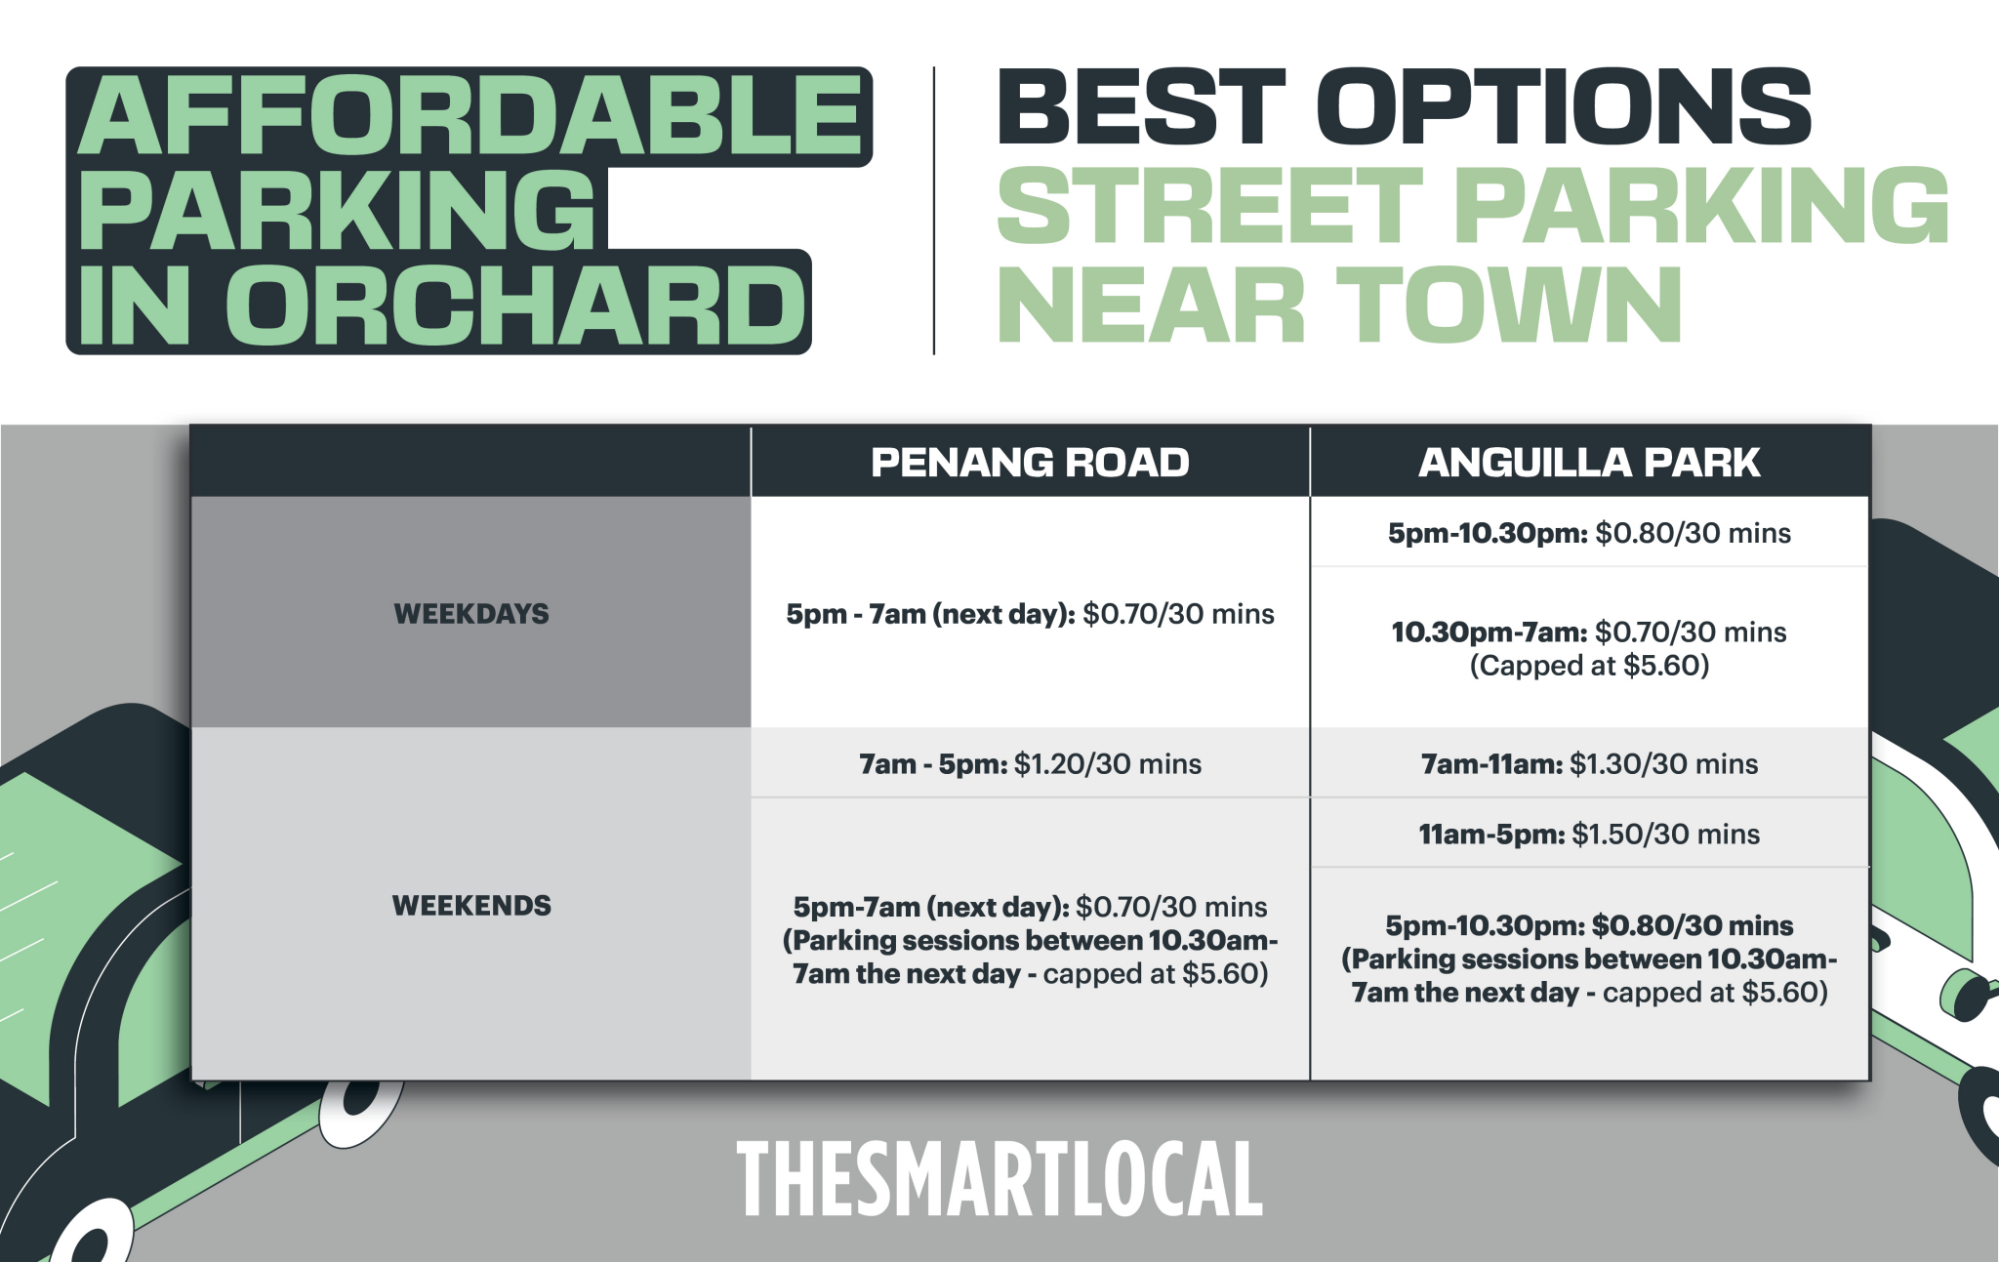 Affordable parking in Orchard